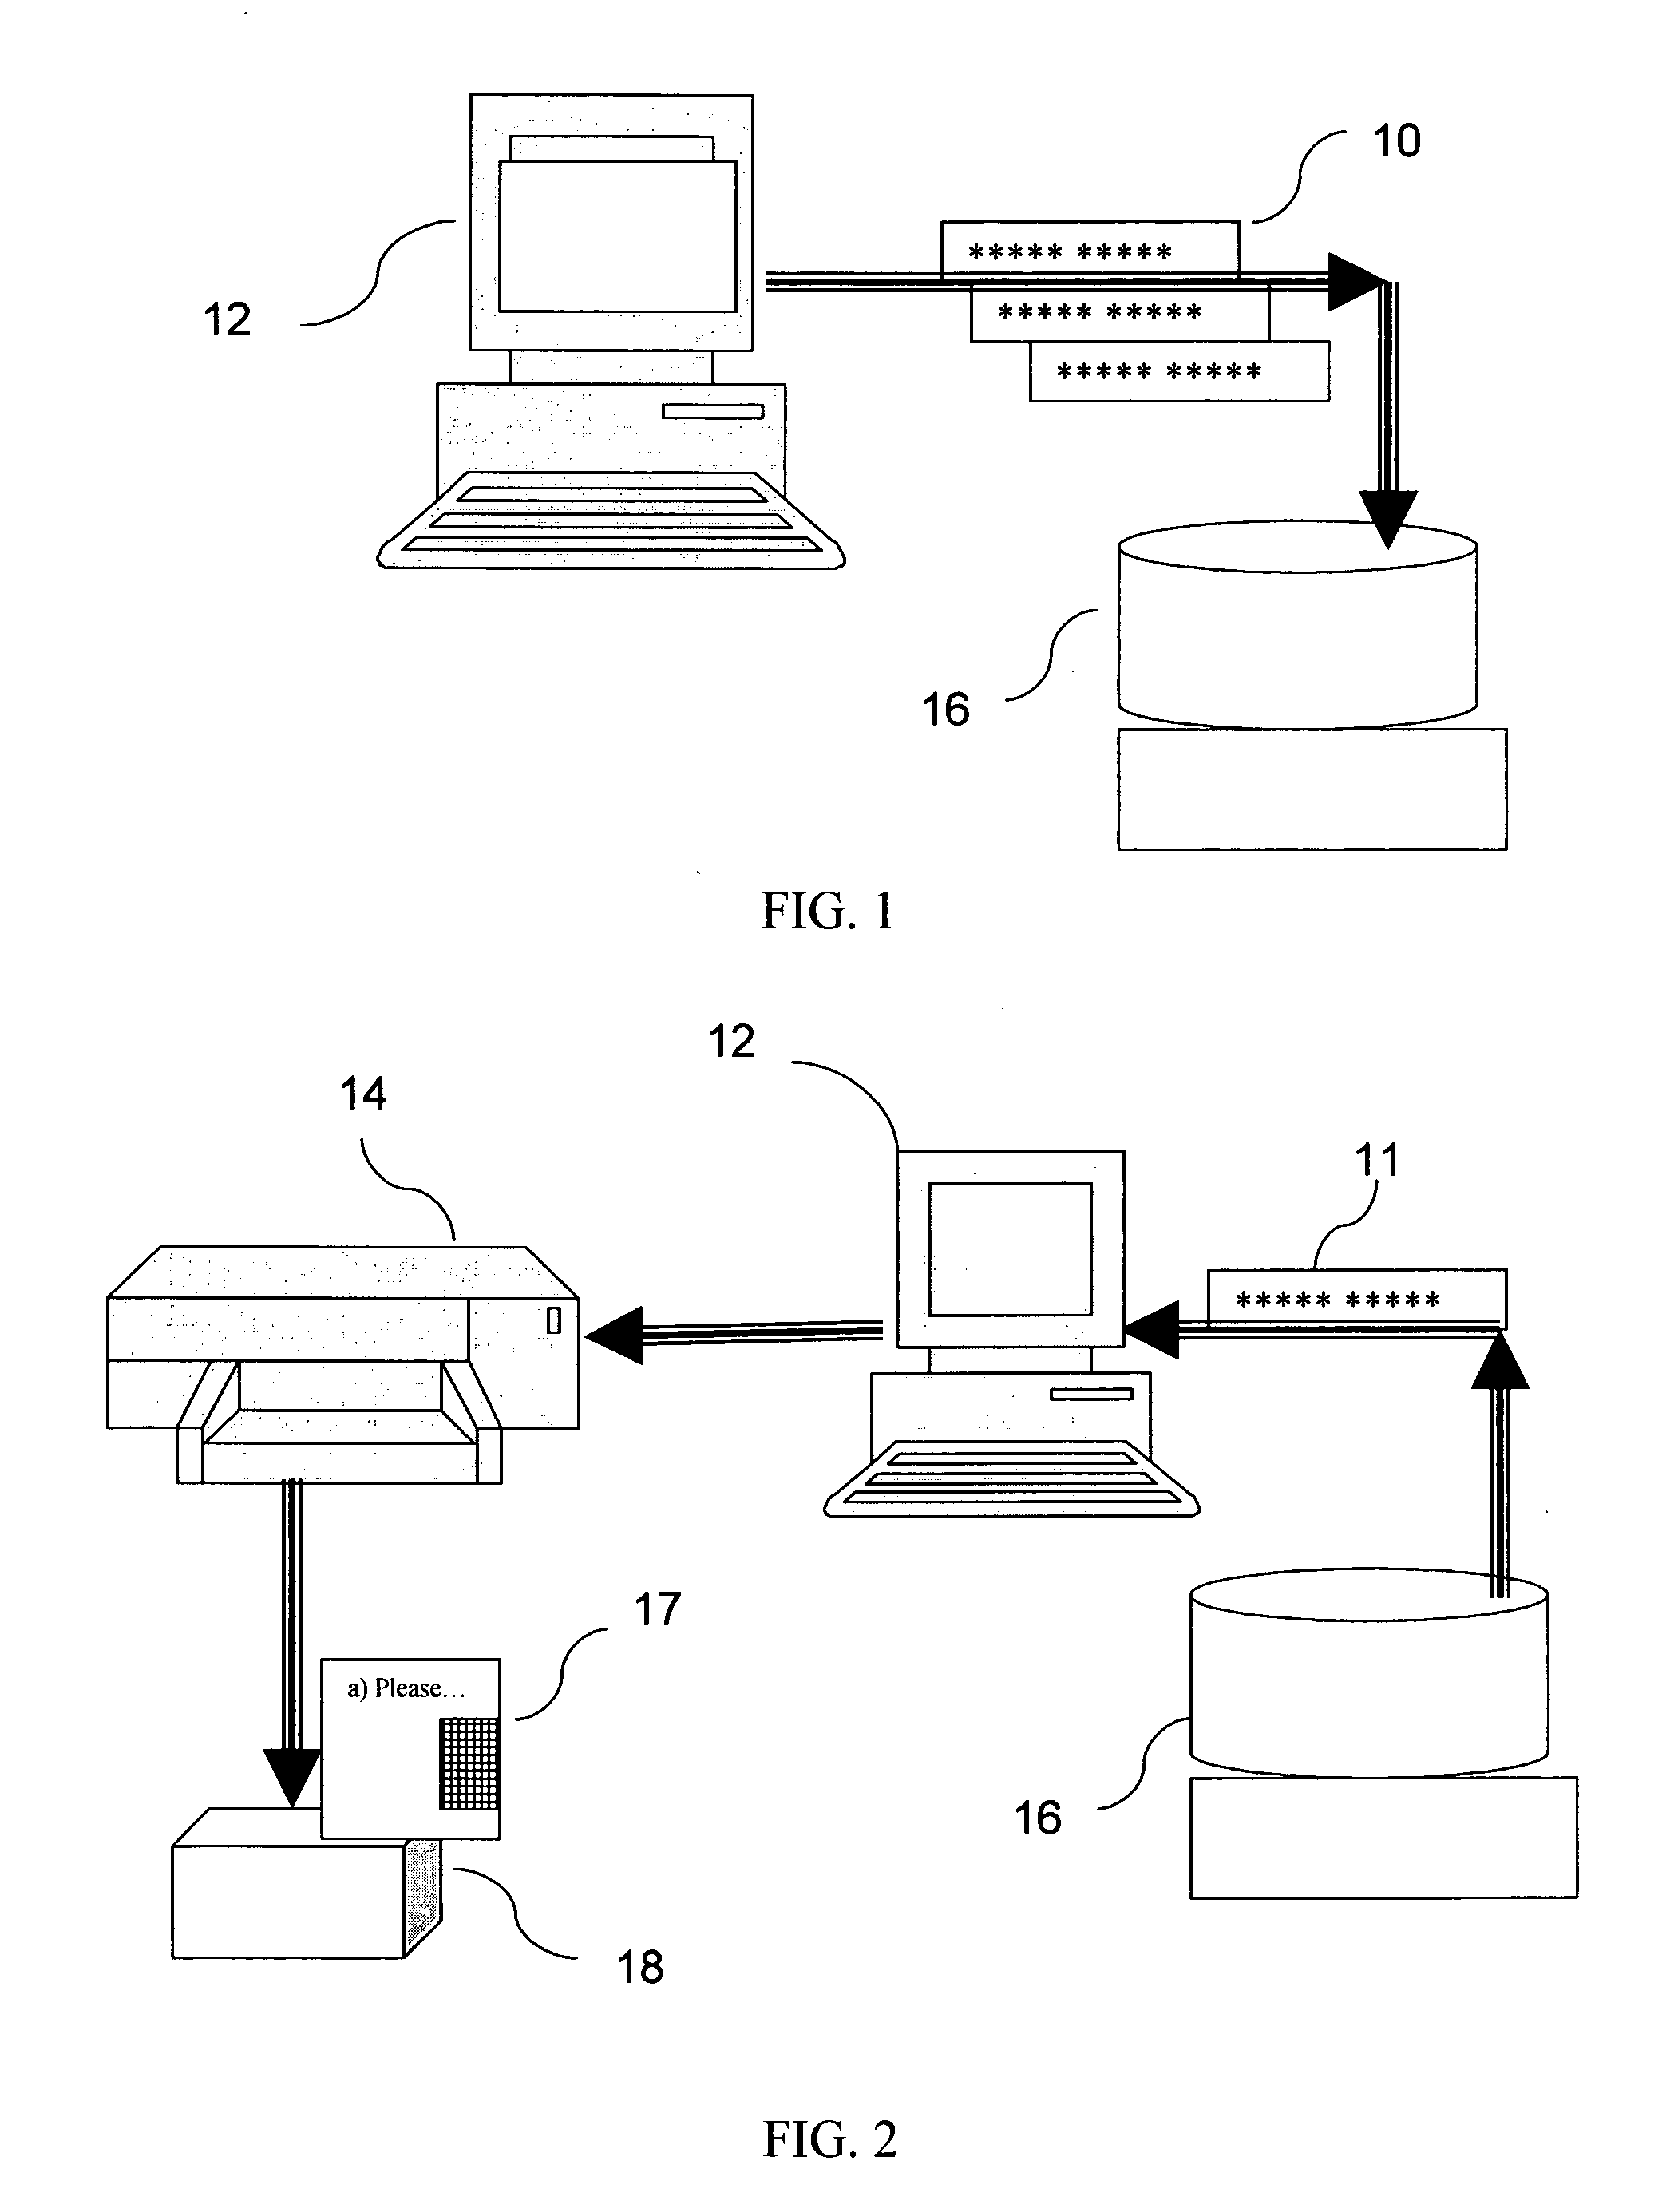 System for product authentication and tracking